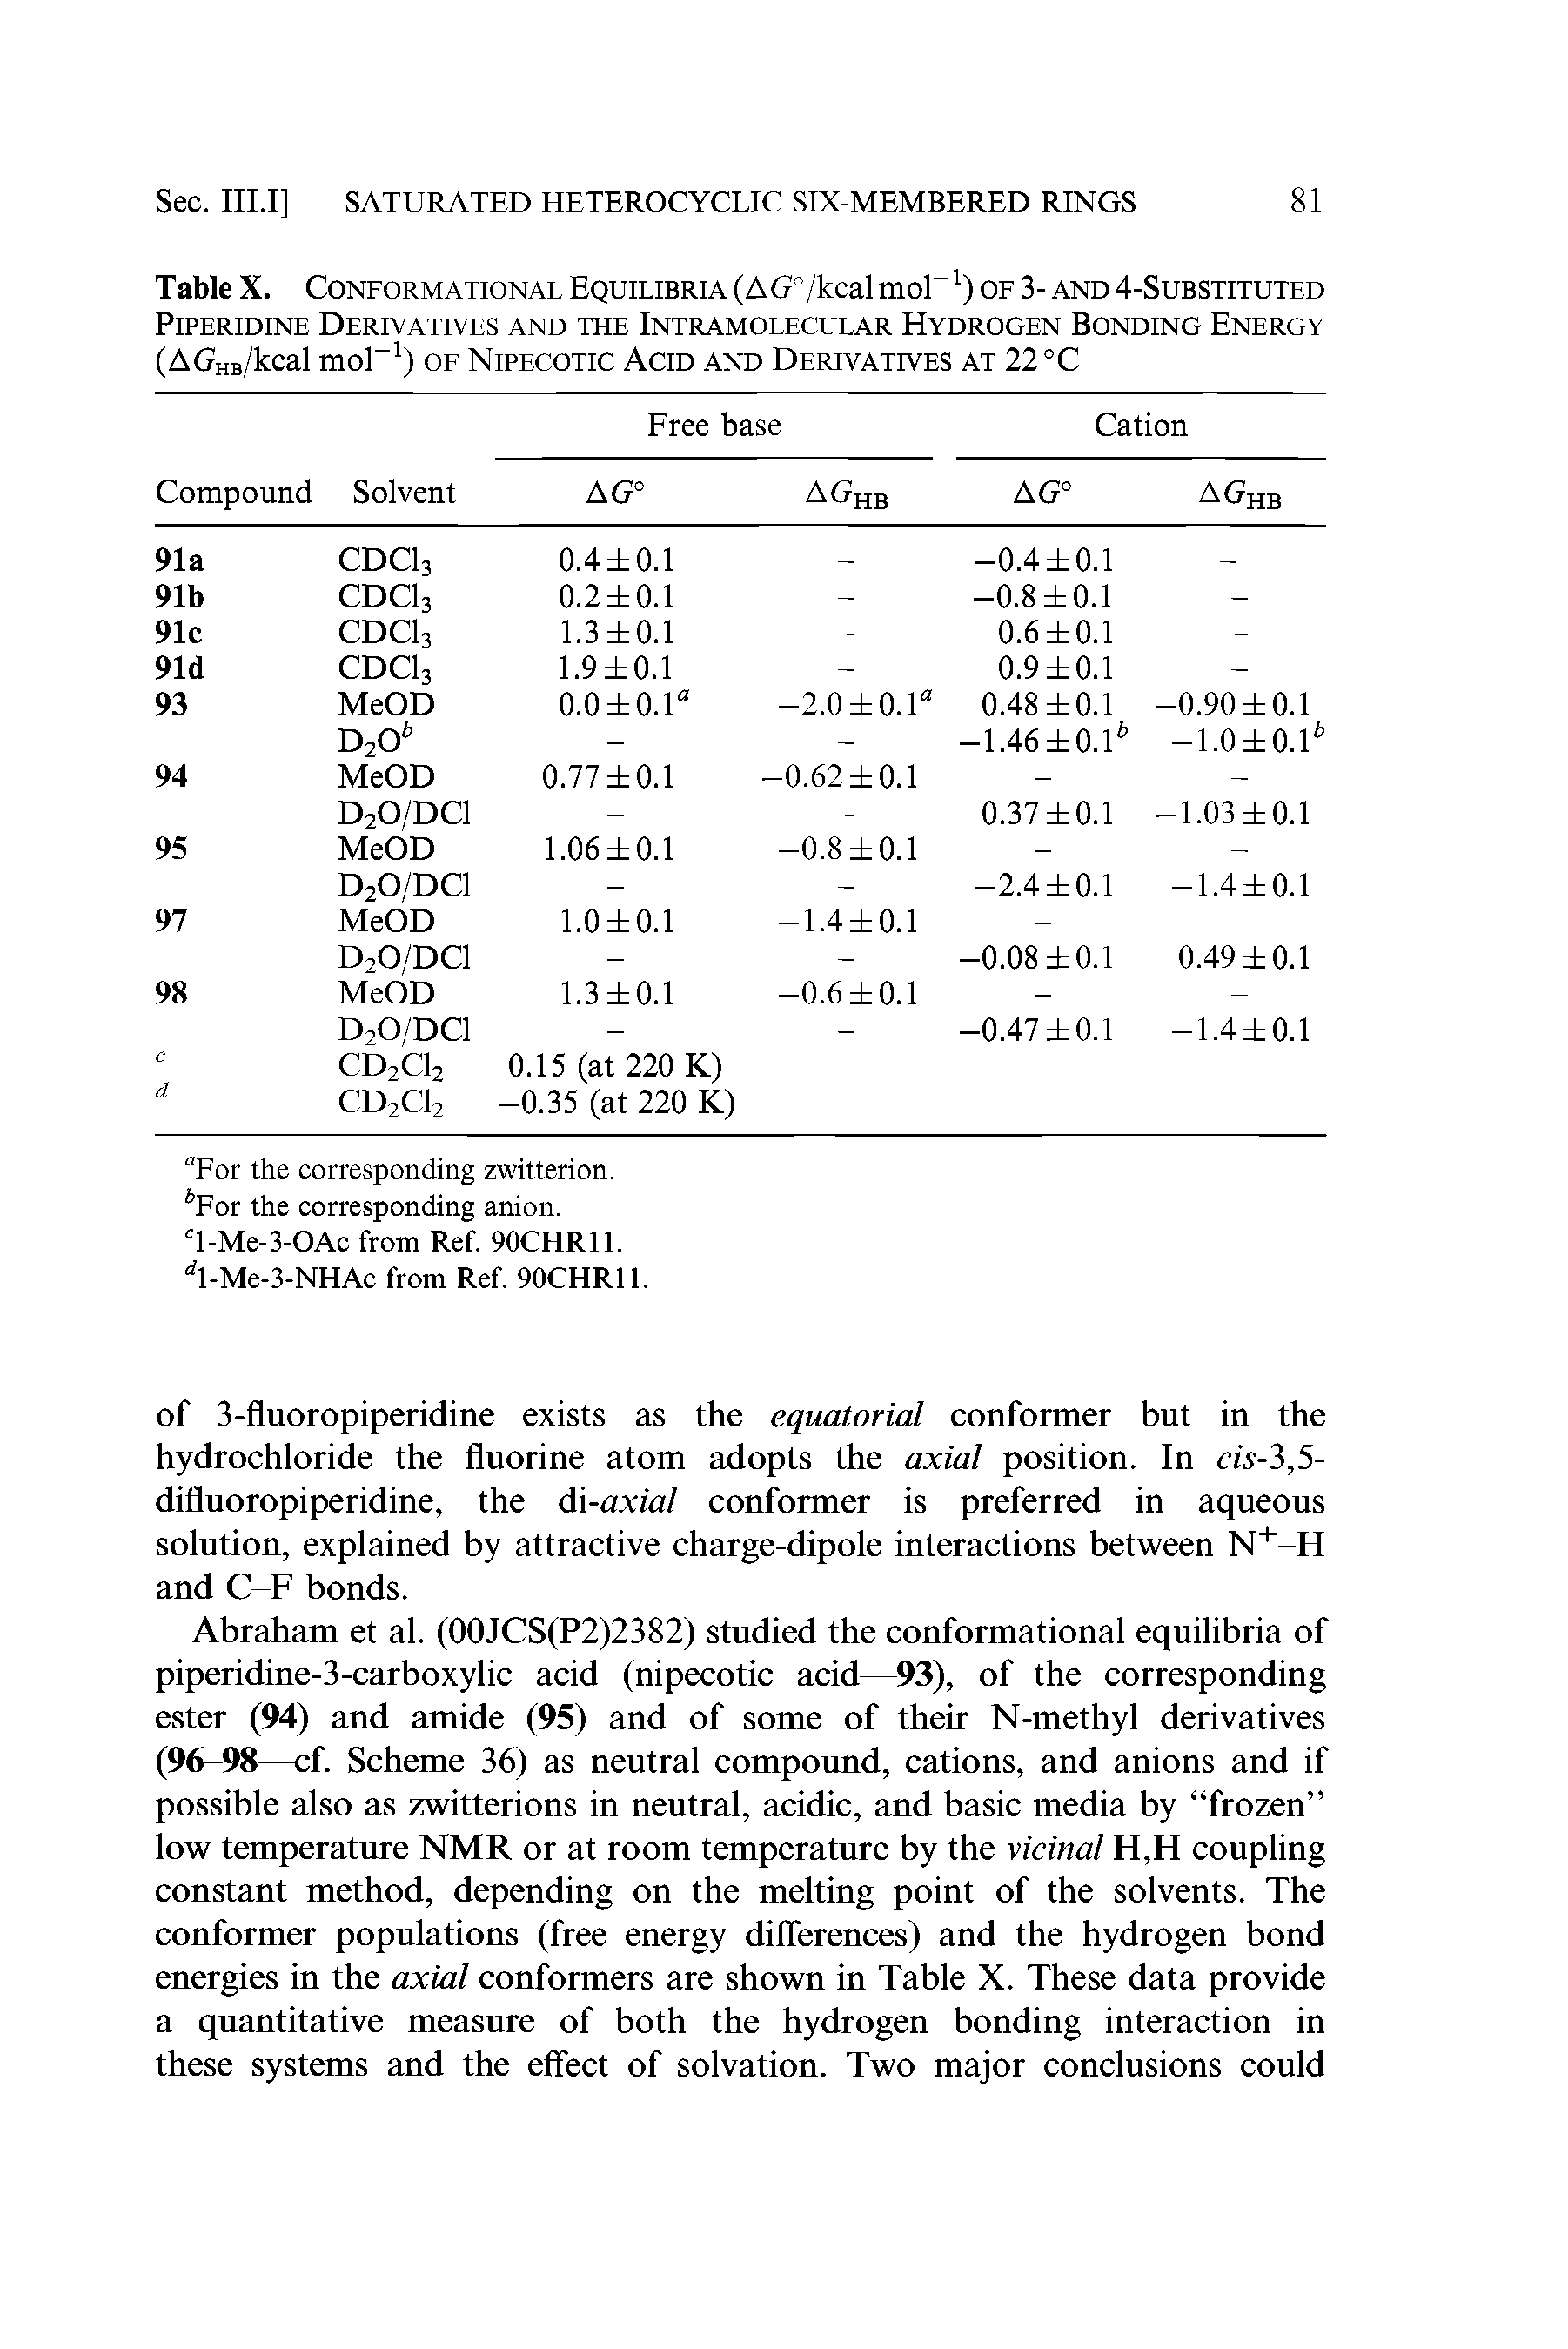 Table X. Conformational Equilibria (AG°/kcalmol 1) of 3- and 4-Substituted Piperidine Derivatives and the Intramolecular Hydrogen Bonding Energy (AGHB/kcal mol-1) of Nipecotic Acid and Derivatives at 22 °C...